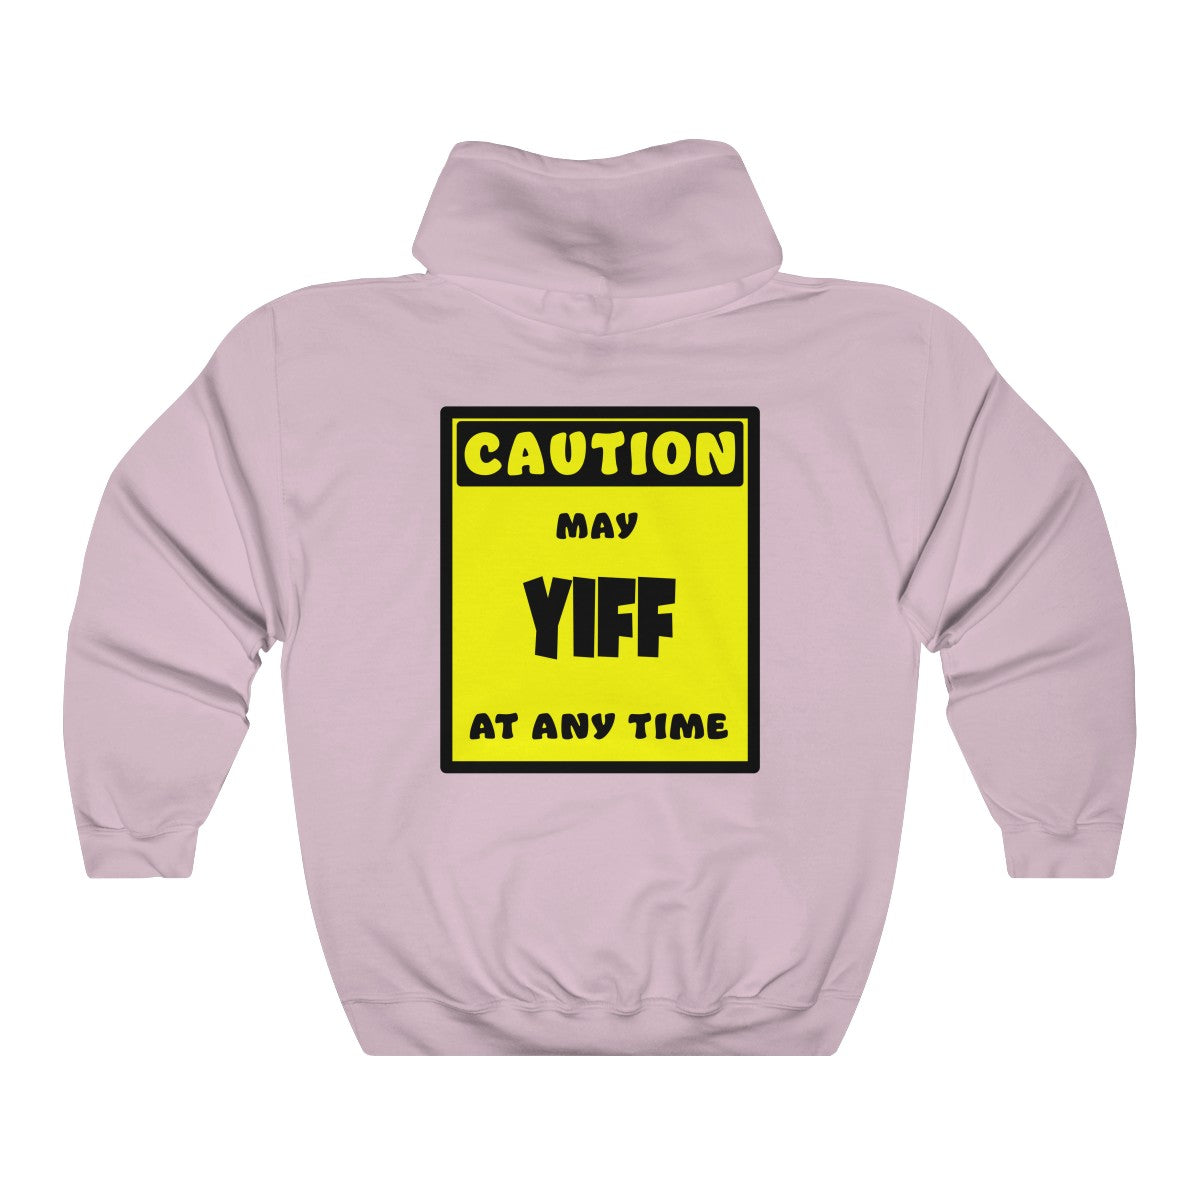 CAUTION! May YIFF at any time! - Hoodie Hoodie AFLT-Whootorca Light Pink S 